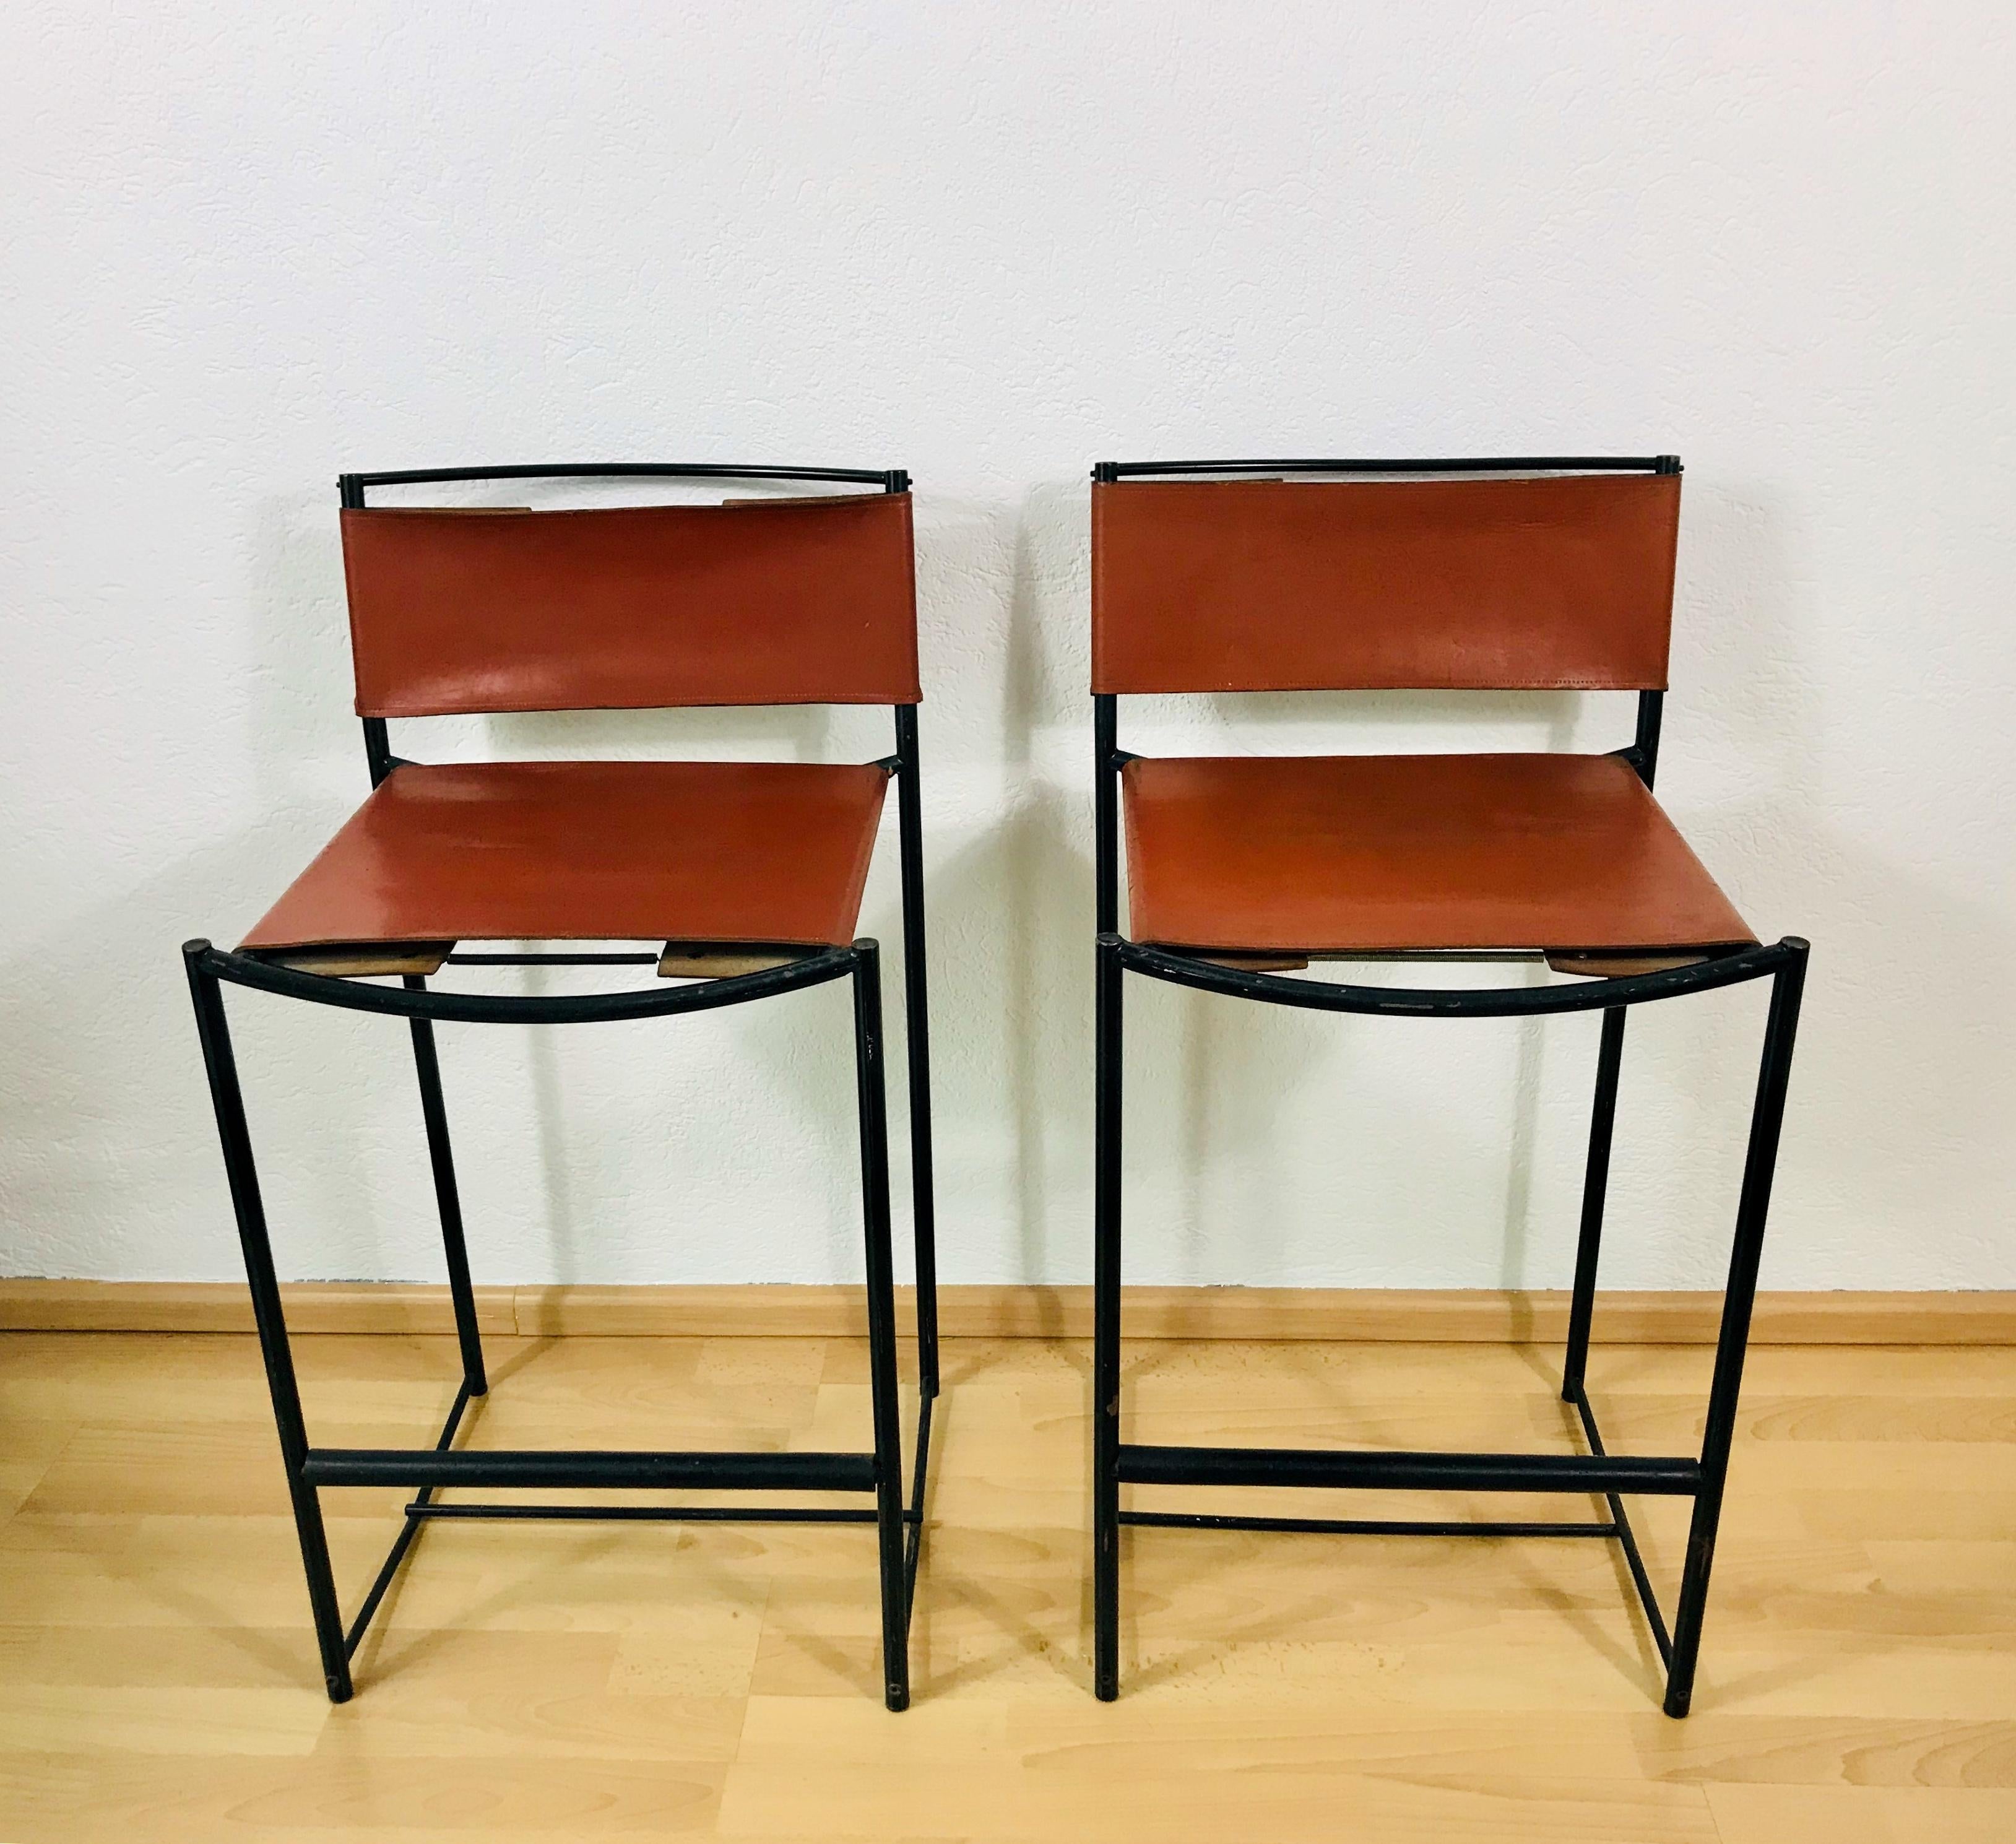 A very rare pair of barstools by Giandomenico Belotti for Alias. Made of black lacquered steel and natural leather.

Good vintage condition.

Free worldwide standard shipping.